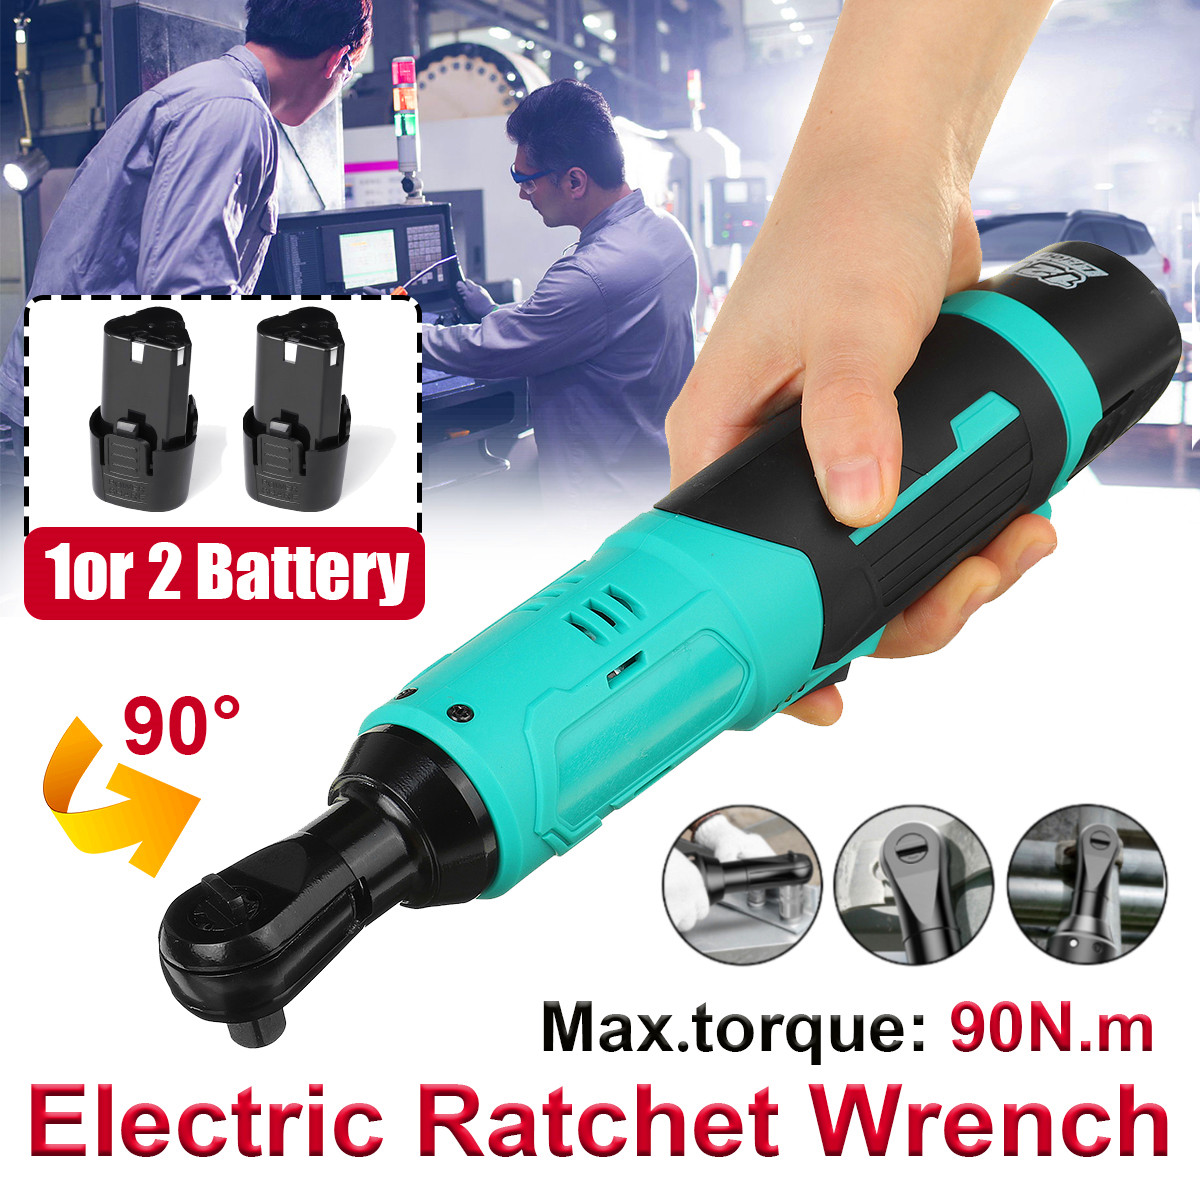 12V-Electric-Ratchet-Wrench-90-degree-Angle-Ratchet-Wrench-Tool-W-1-or-2-Battery-1783106-1